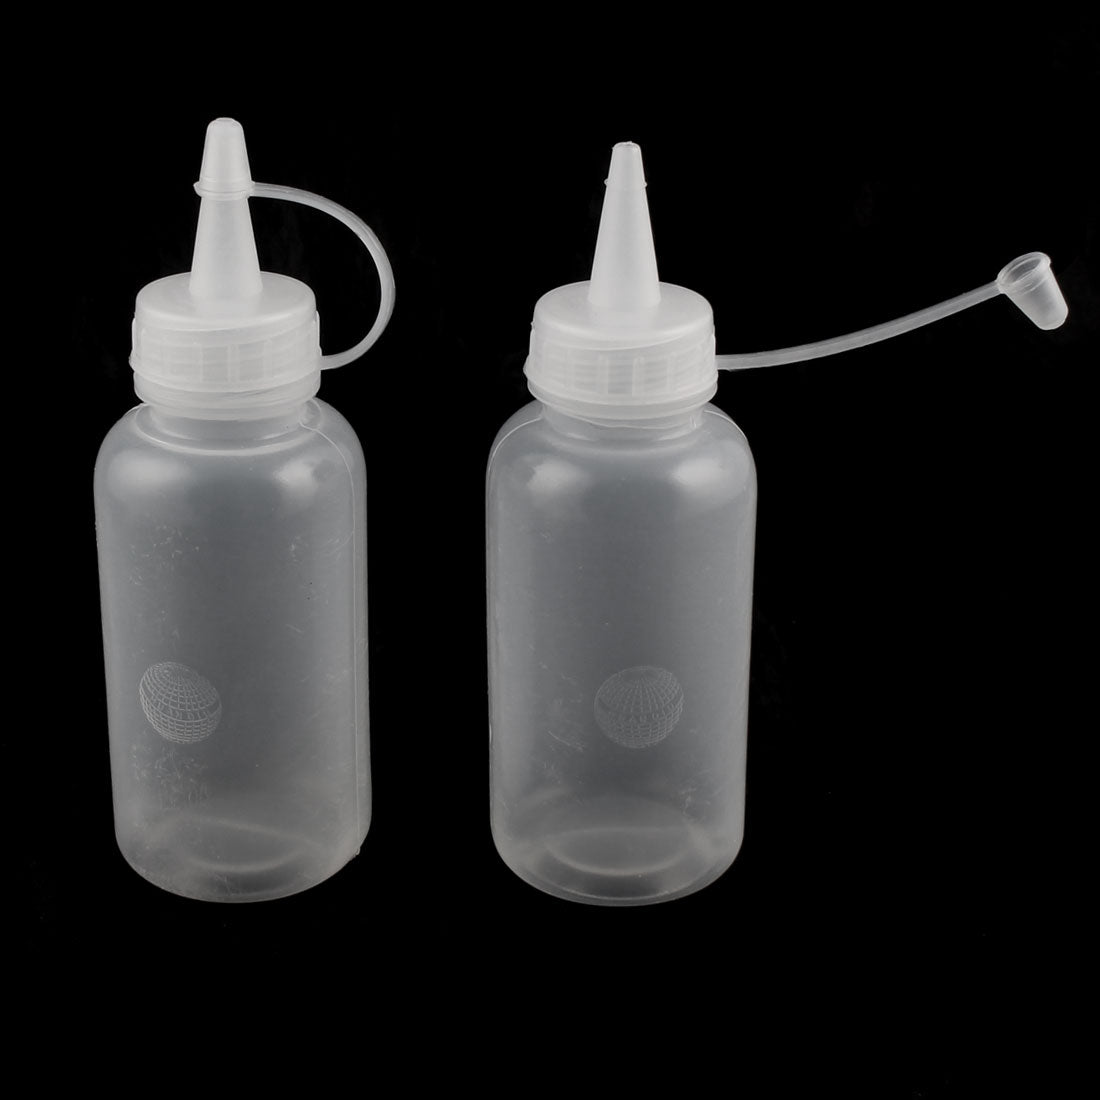 uxcell Uxcell Plastic Squeeze Bottle Measuring Storage Holder Clear White 100ml Capacity 12pcs